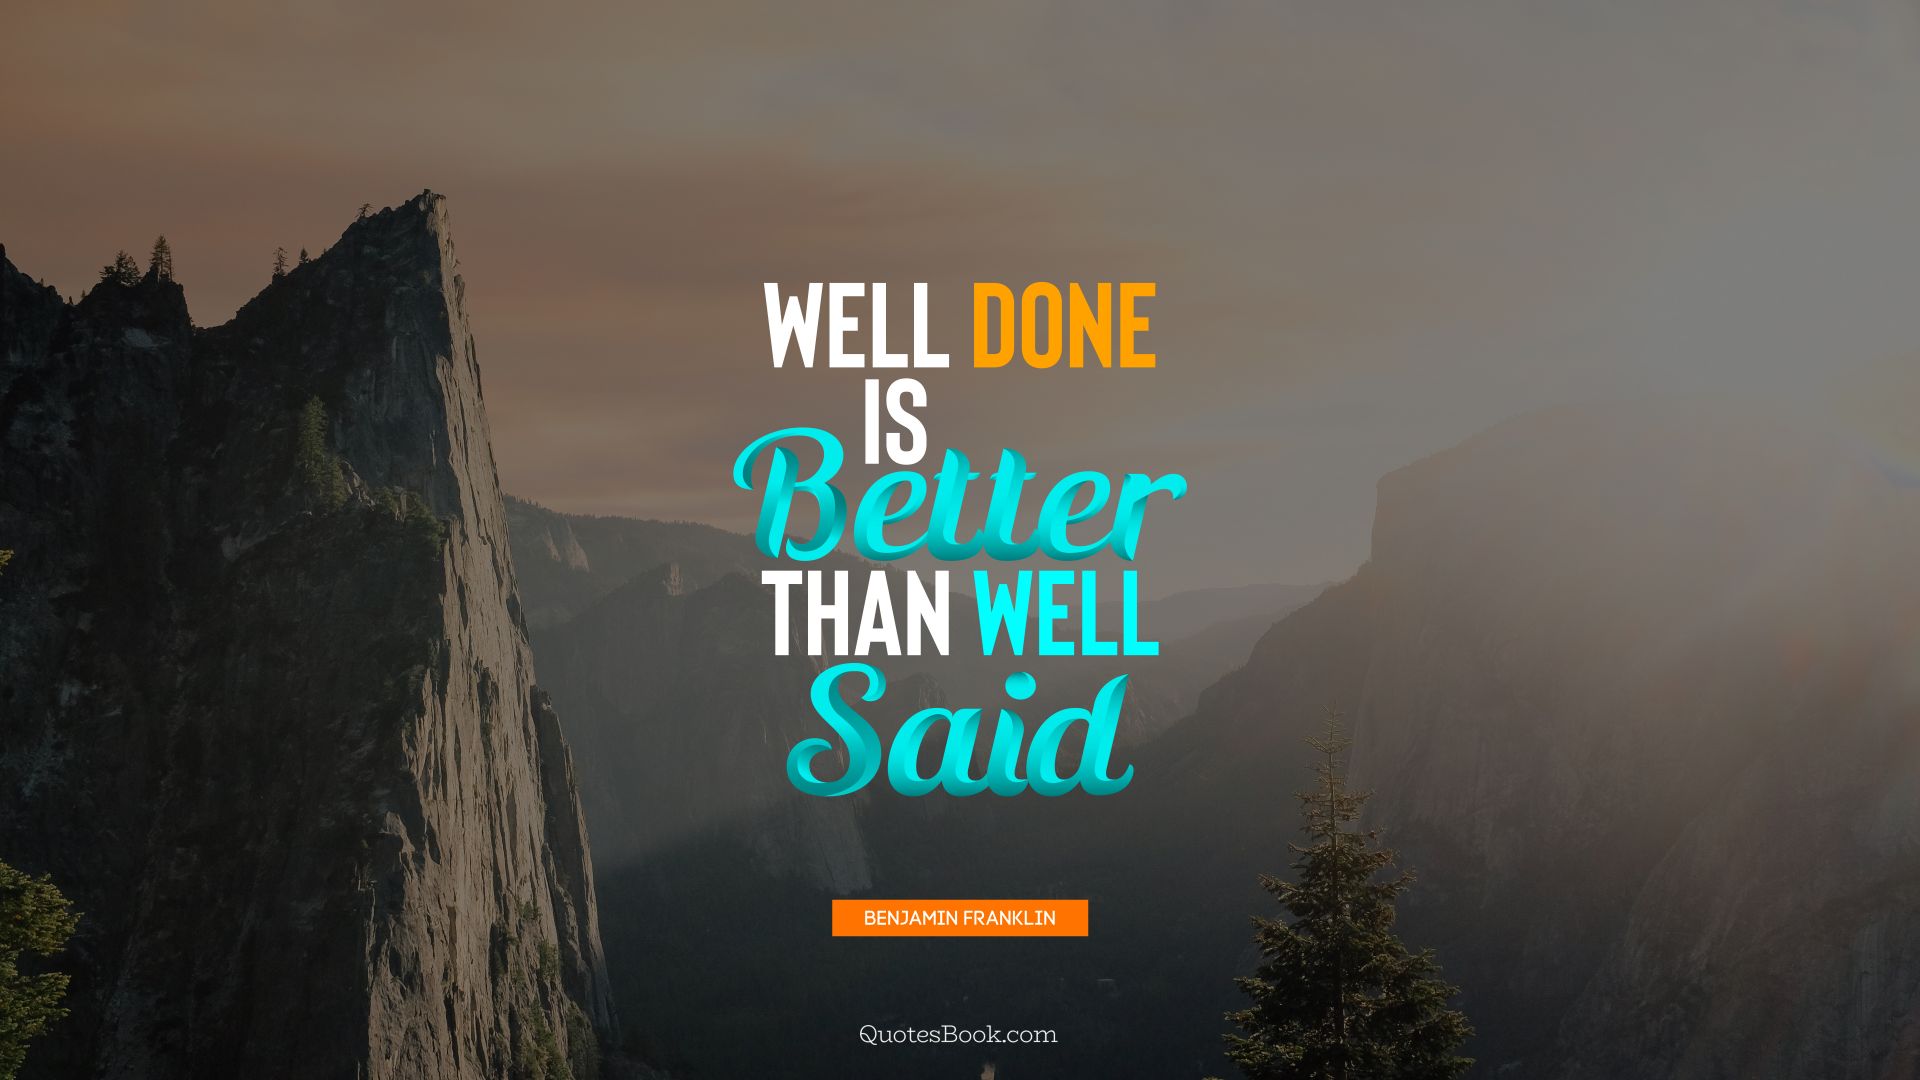 Well done is better than well said   Quote by Benjamin Franklin